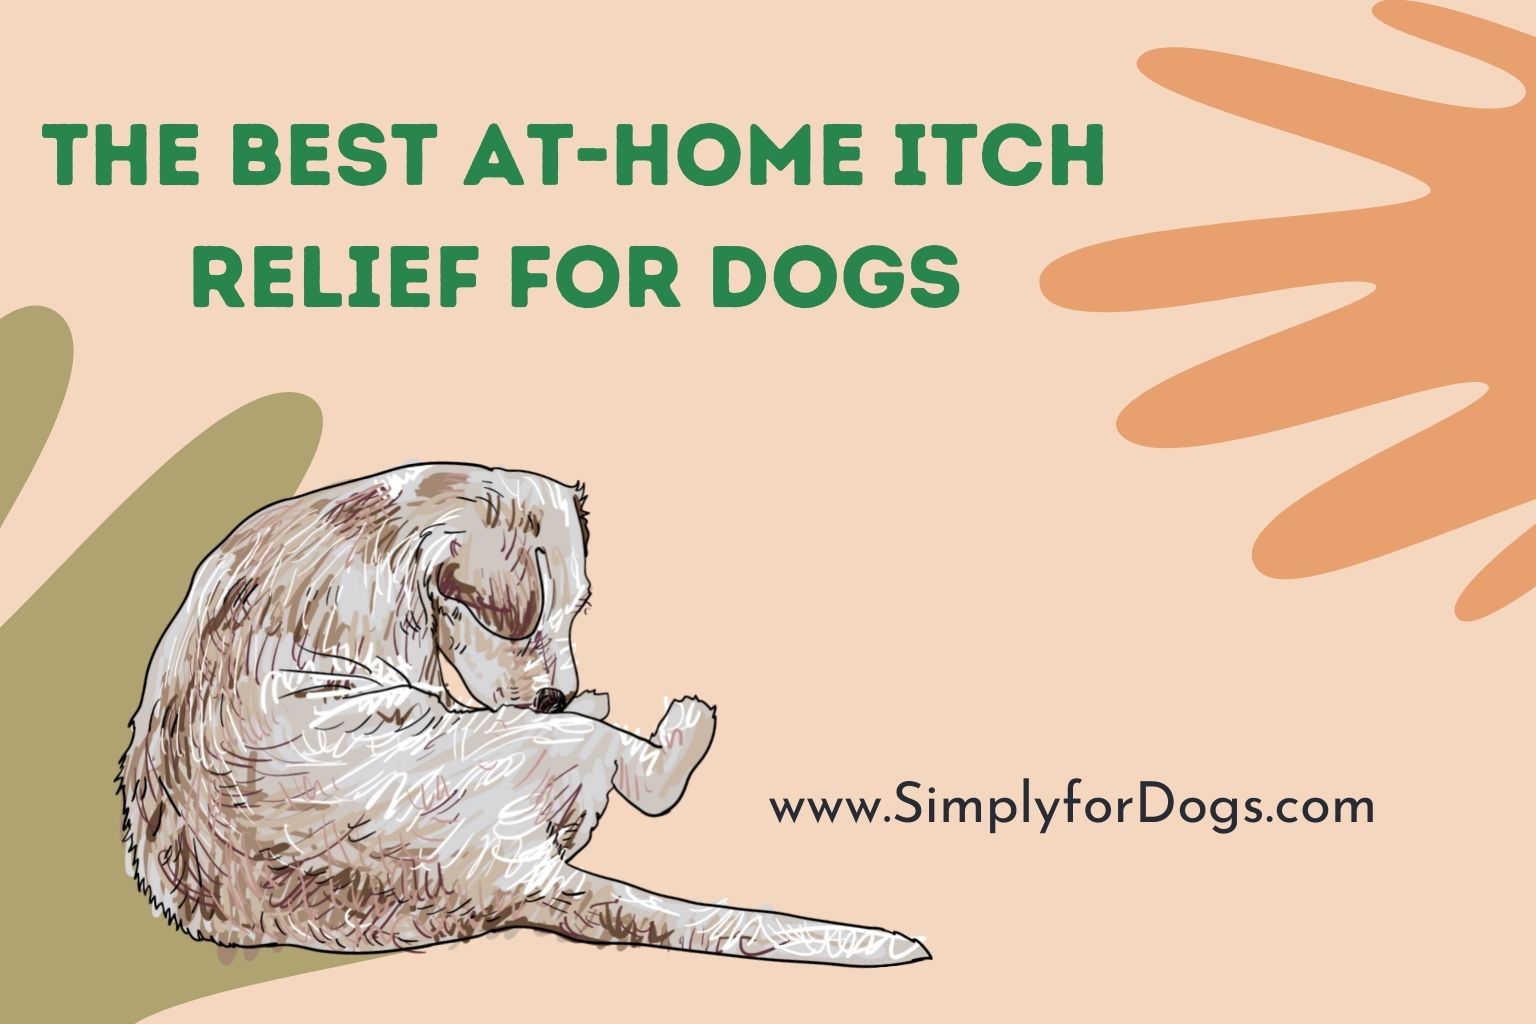 The Best At-Home Itch Relief for Dogs